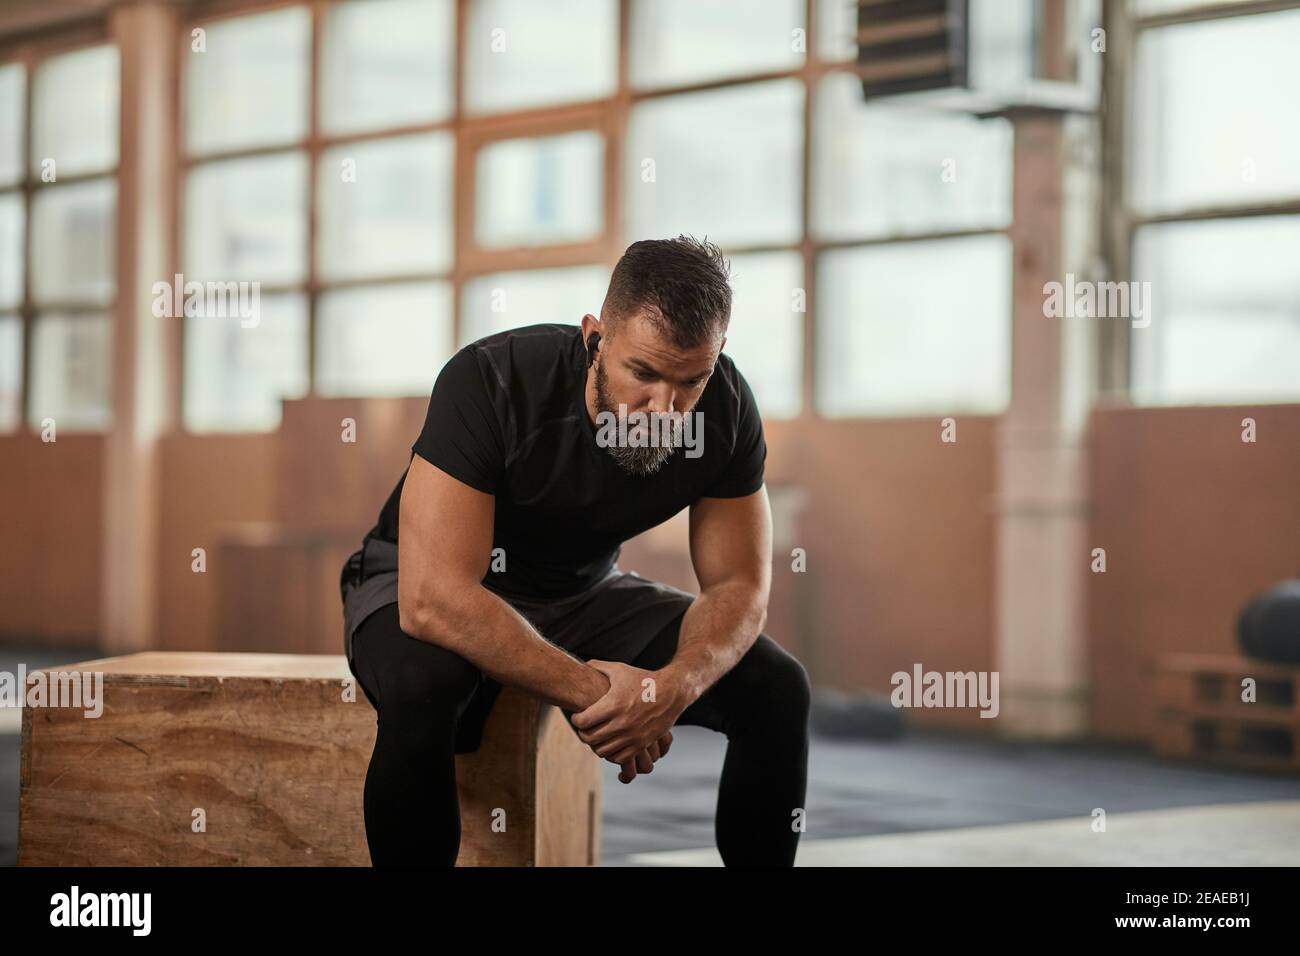 Fit young man in sportswear sitting on a box in a gym and looking exhausted after a workout session Stock Photo